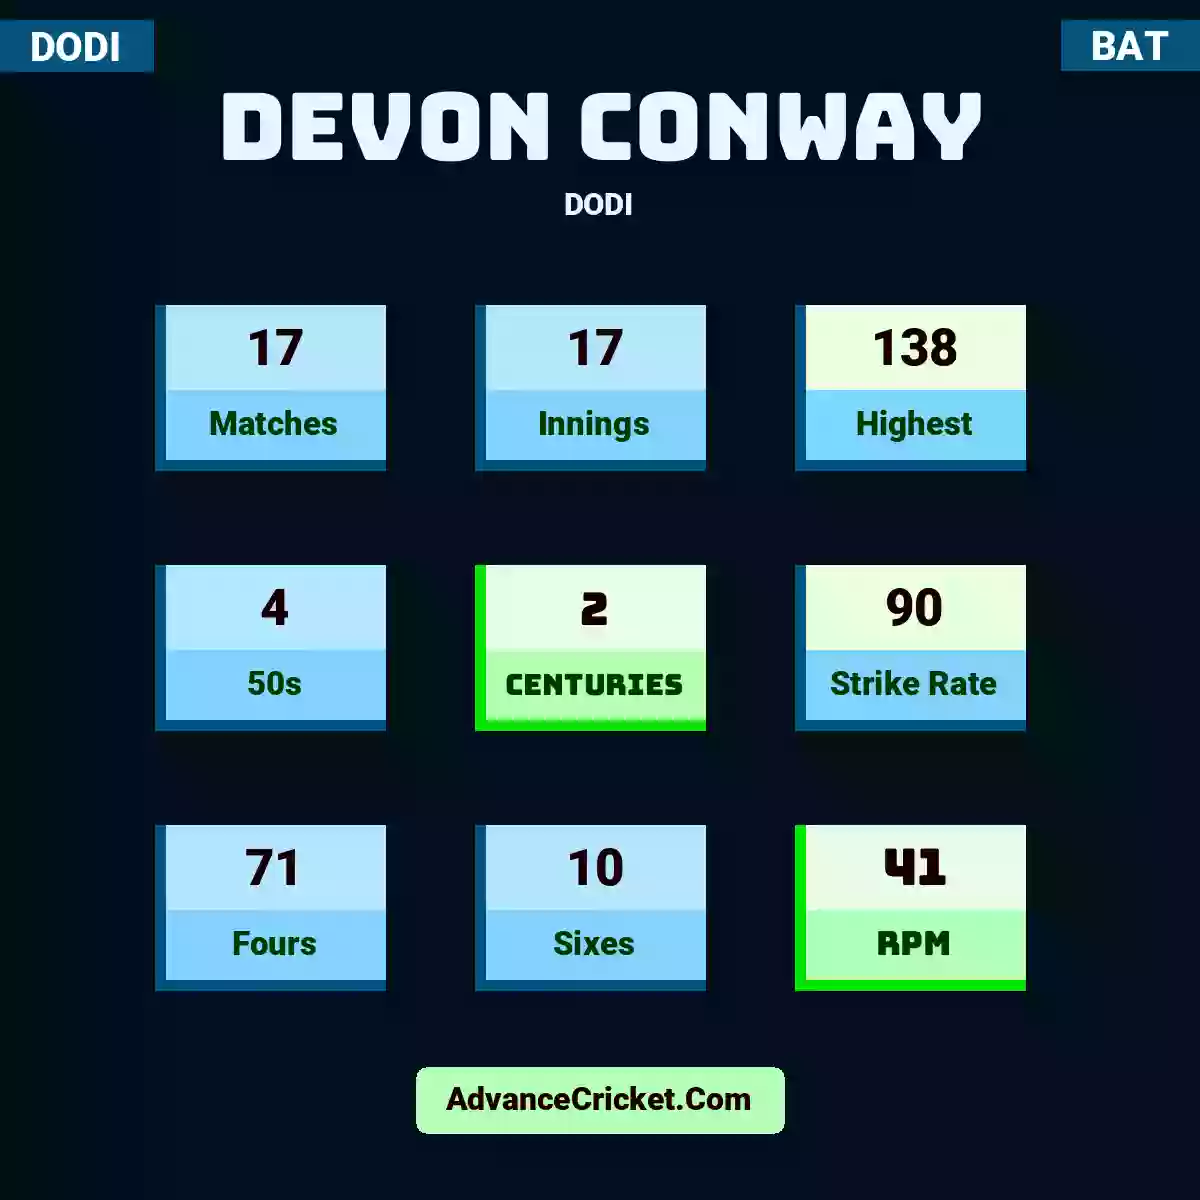 Devon Conway DODI , Devon Conway played 17 matches, scored 138 runs as highest, 4 half-centuries, and 2 centuries, with a strike rate of 90. D.Conway hit 71 fours and 10 sixes, with an RPM of 41.